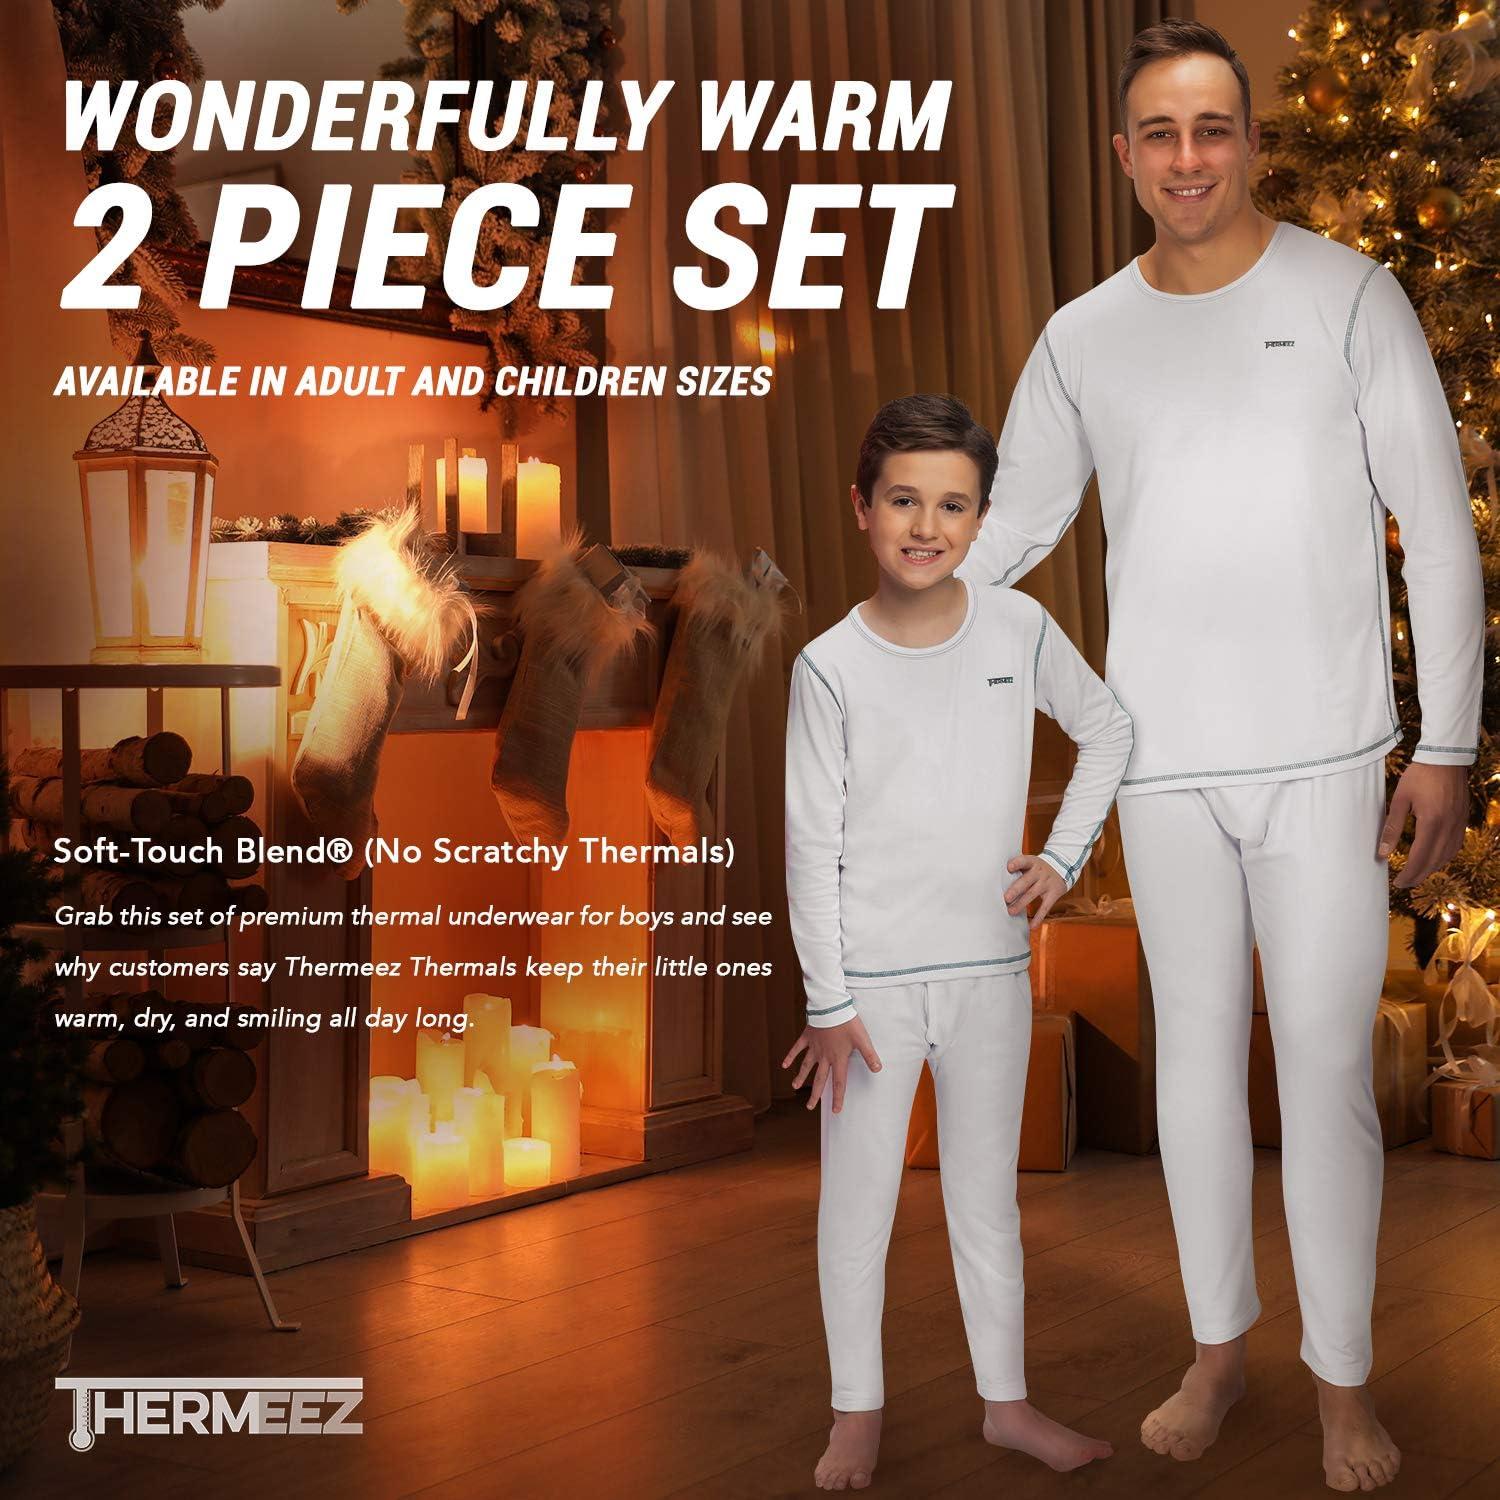 Heat Holders - Mens Winter Thick Thermal Underwear Long Johns Pants Bottoms